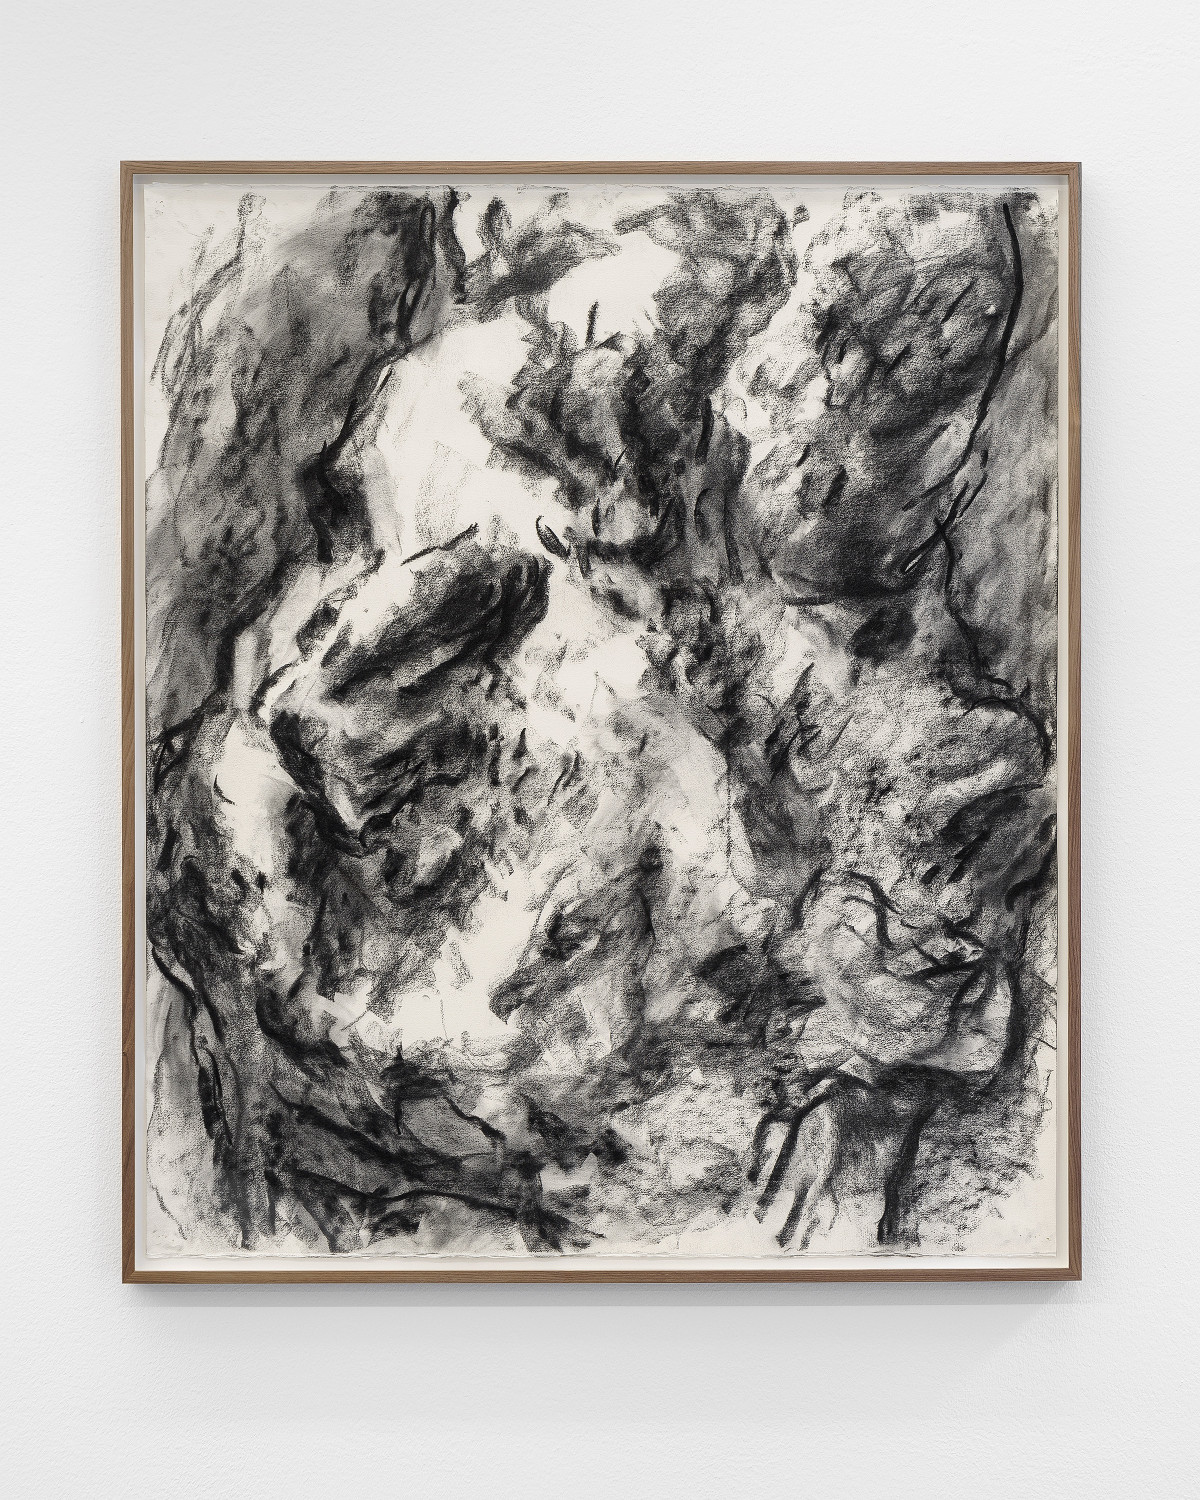 William Tucker, ‘Study for Maria Luisa’, 1998, Charcoal on paper